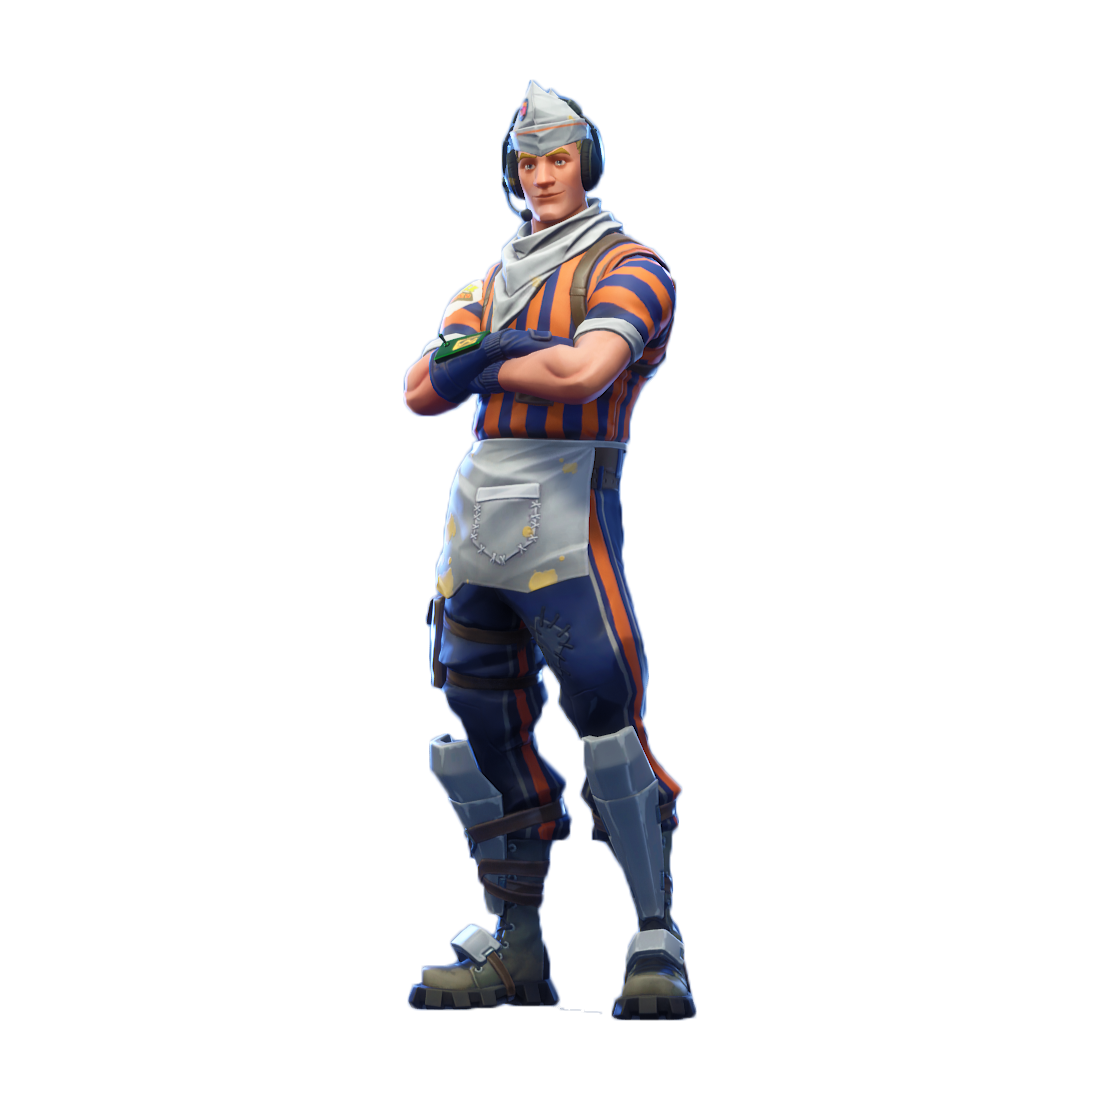 Fortnite Grill Sergeant Outfits Skins